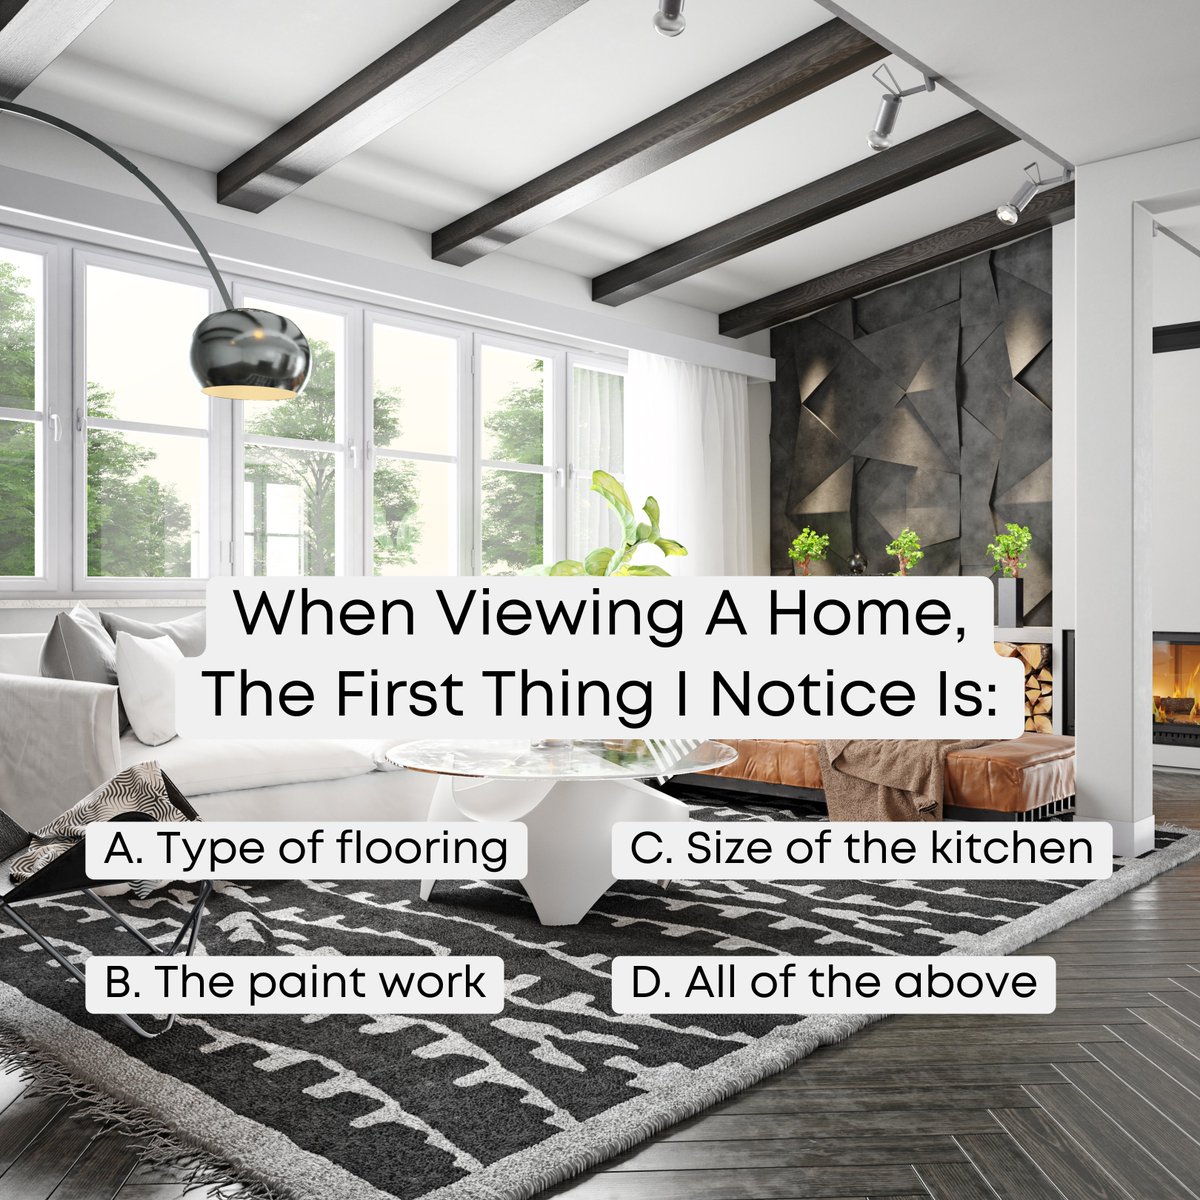 What catches your eye first when checking out a new home?🏡Share your top pick in the comments below! 👀✨
----
#kendallcounty #kanecounty #kwrealestate #kwrealtor #rebecareciokwinnovate